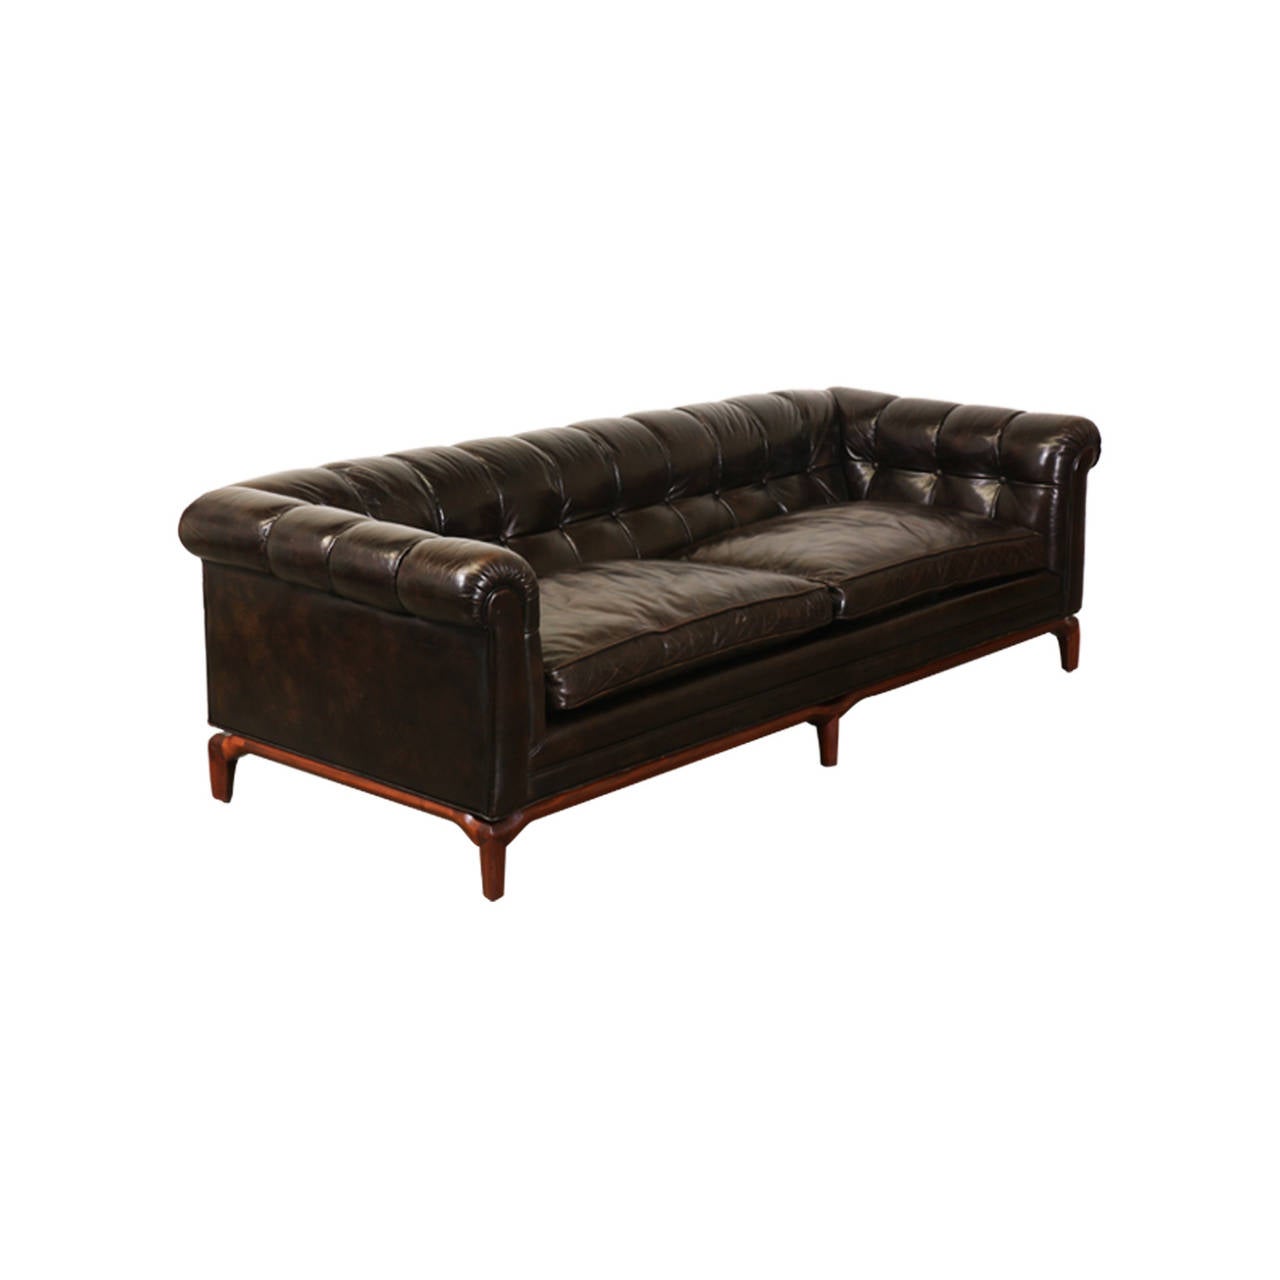 Mid-Century Modern Maurice Bailey Biscuit Tufted Leather Sofa for Monteverdi-Young